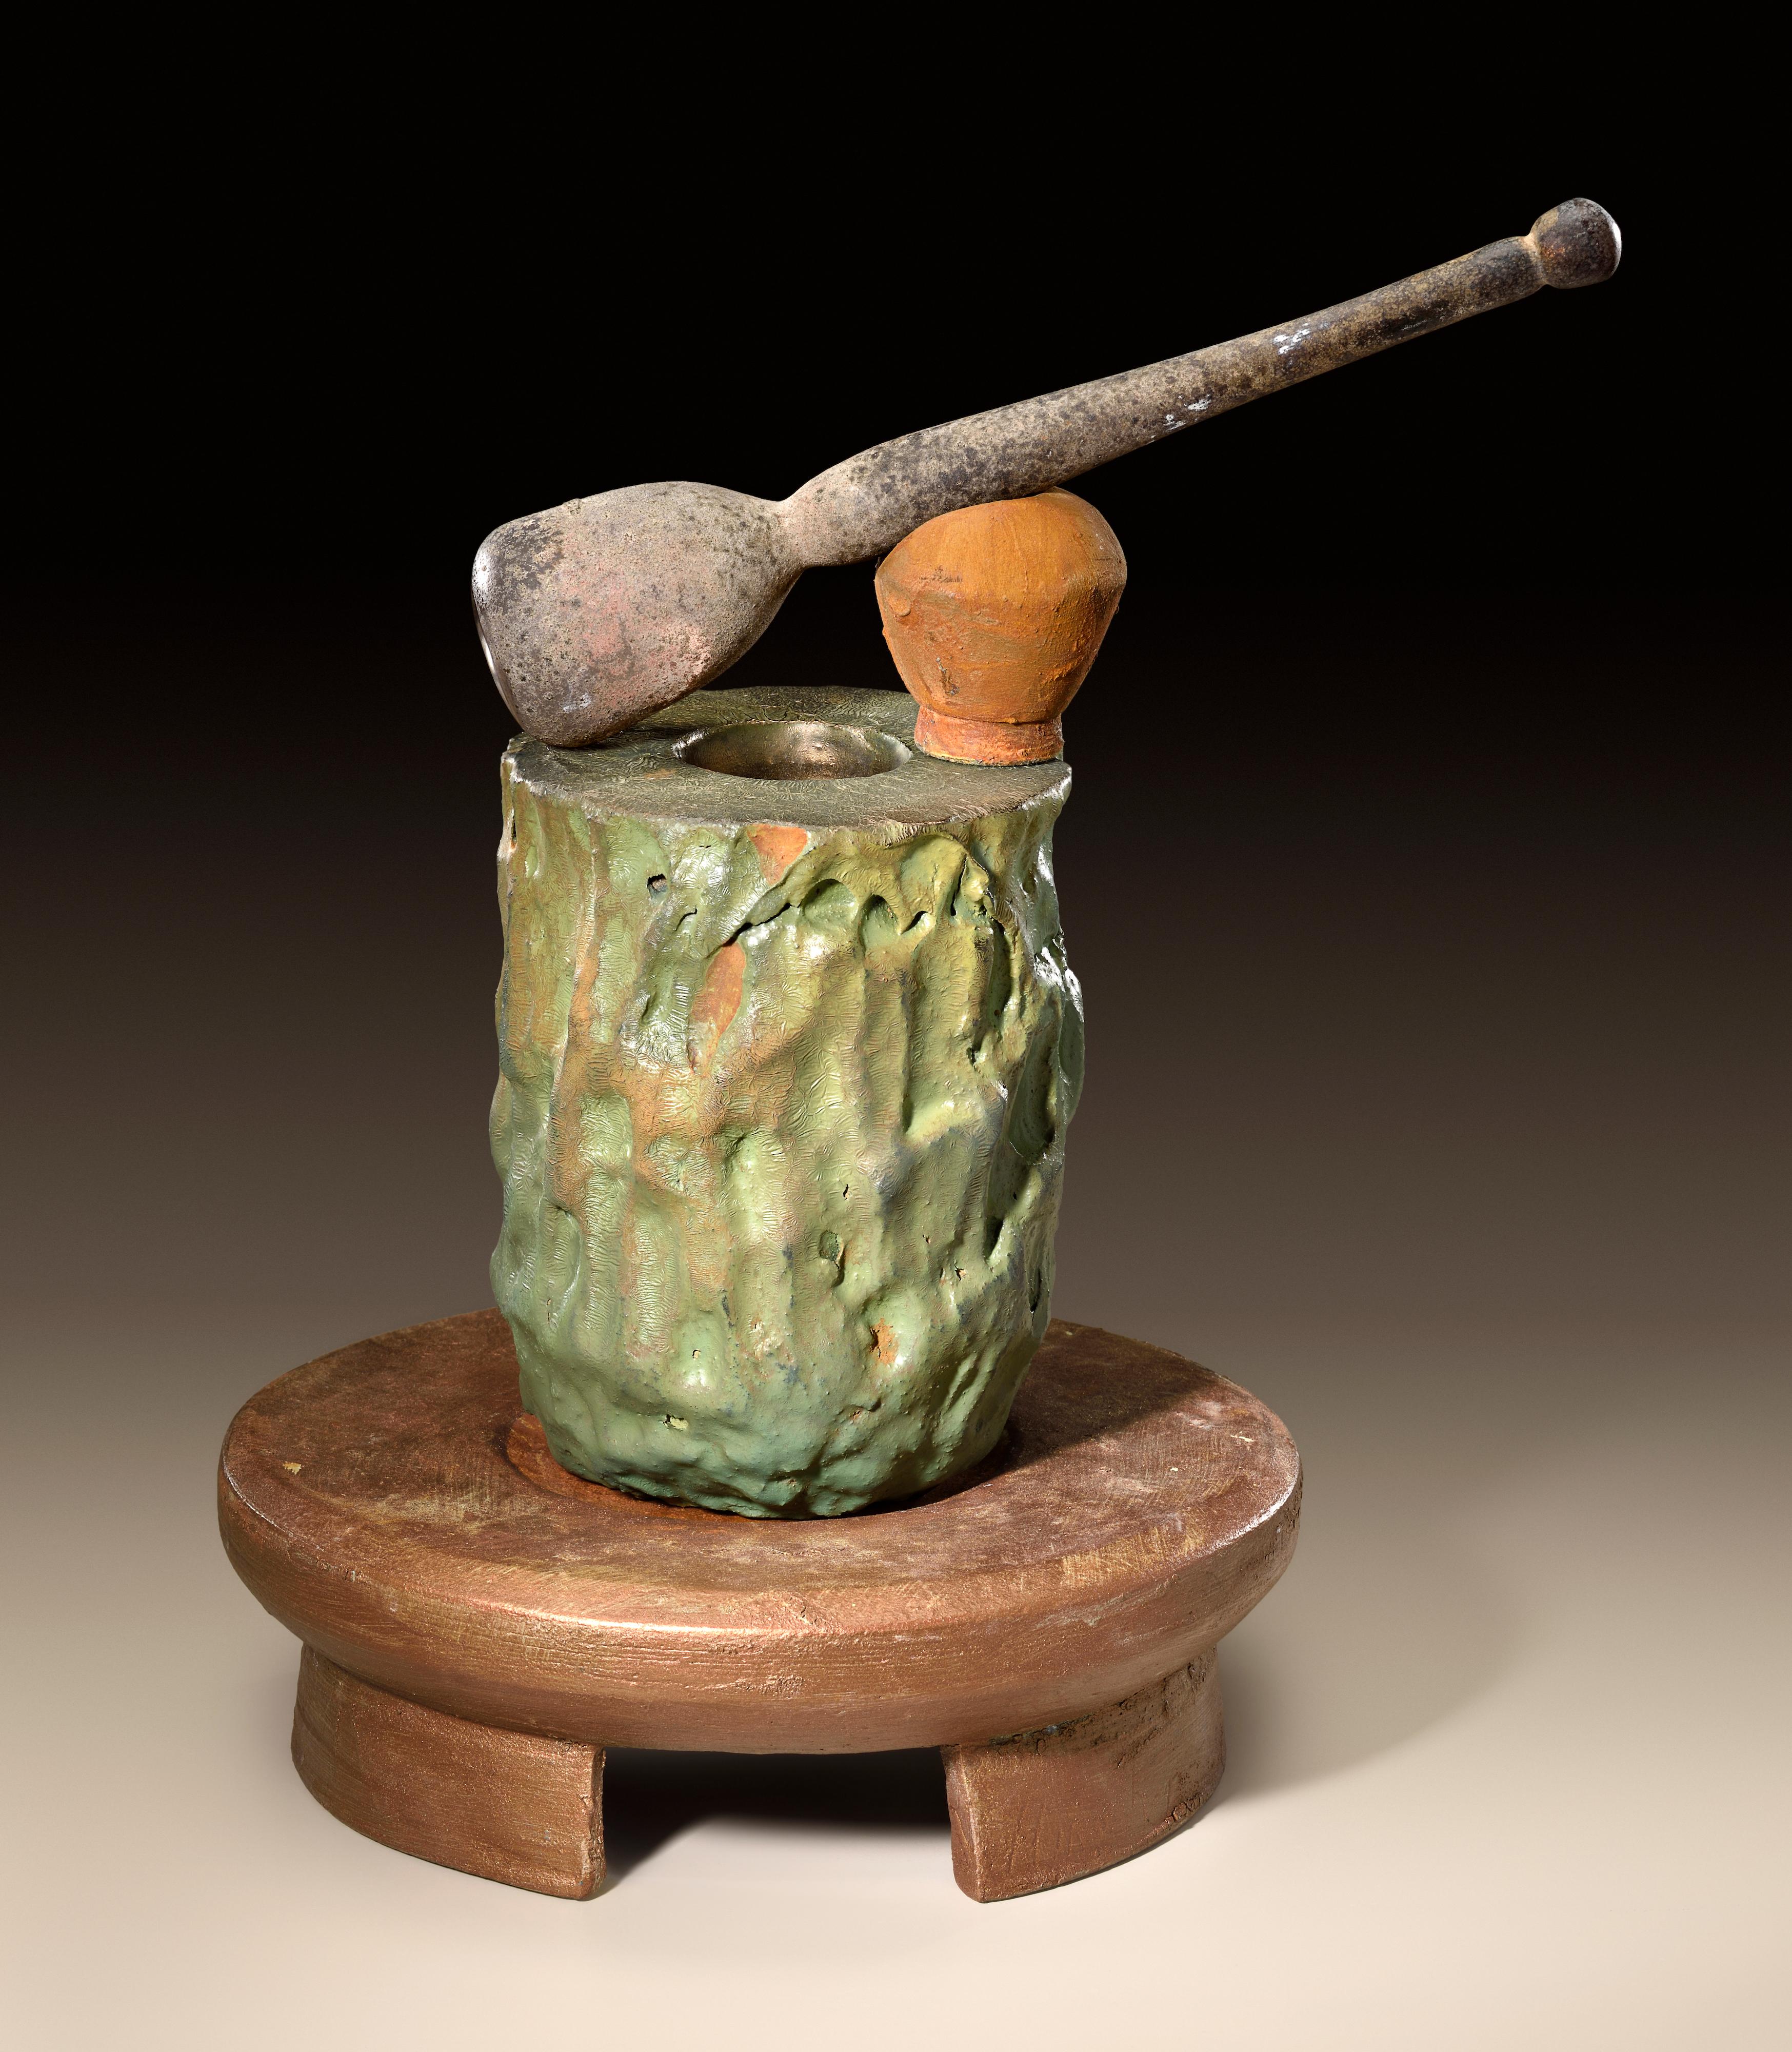 Contemporary Richard Hirsch Glazed Ceramic Crucible Sculpture with Blown Glass Pestle, 2018 For Sale